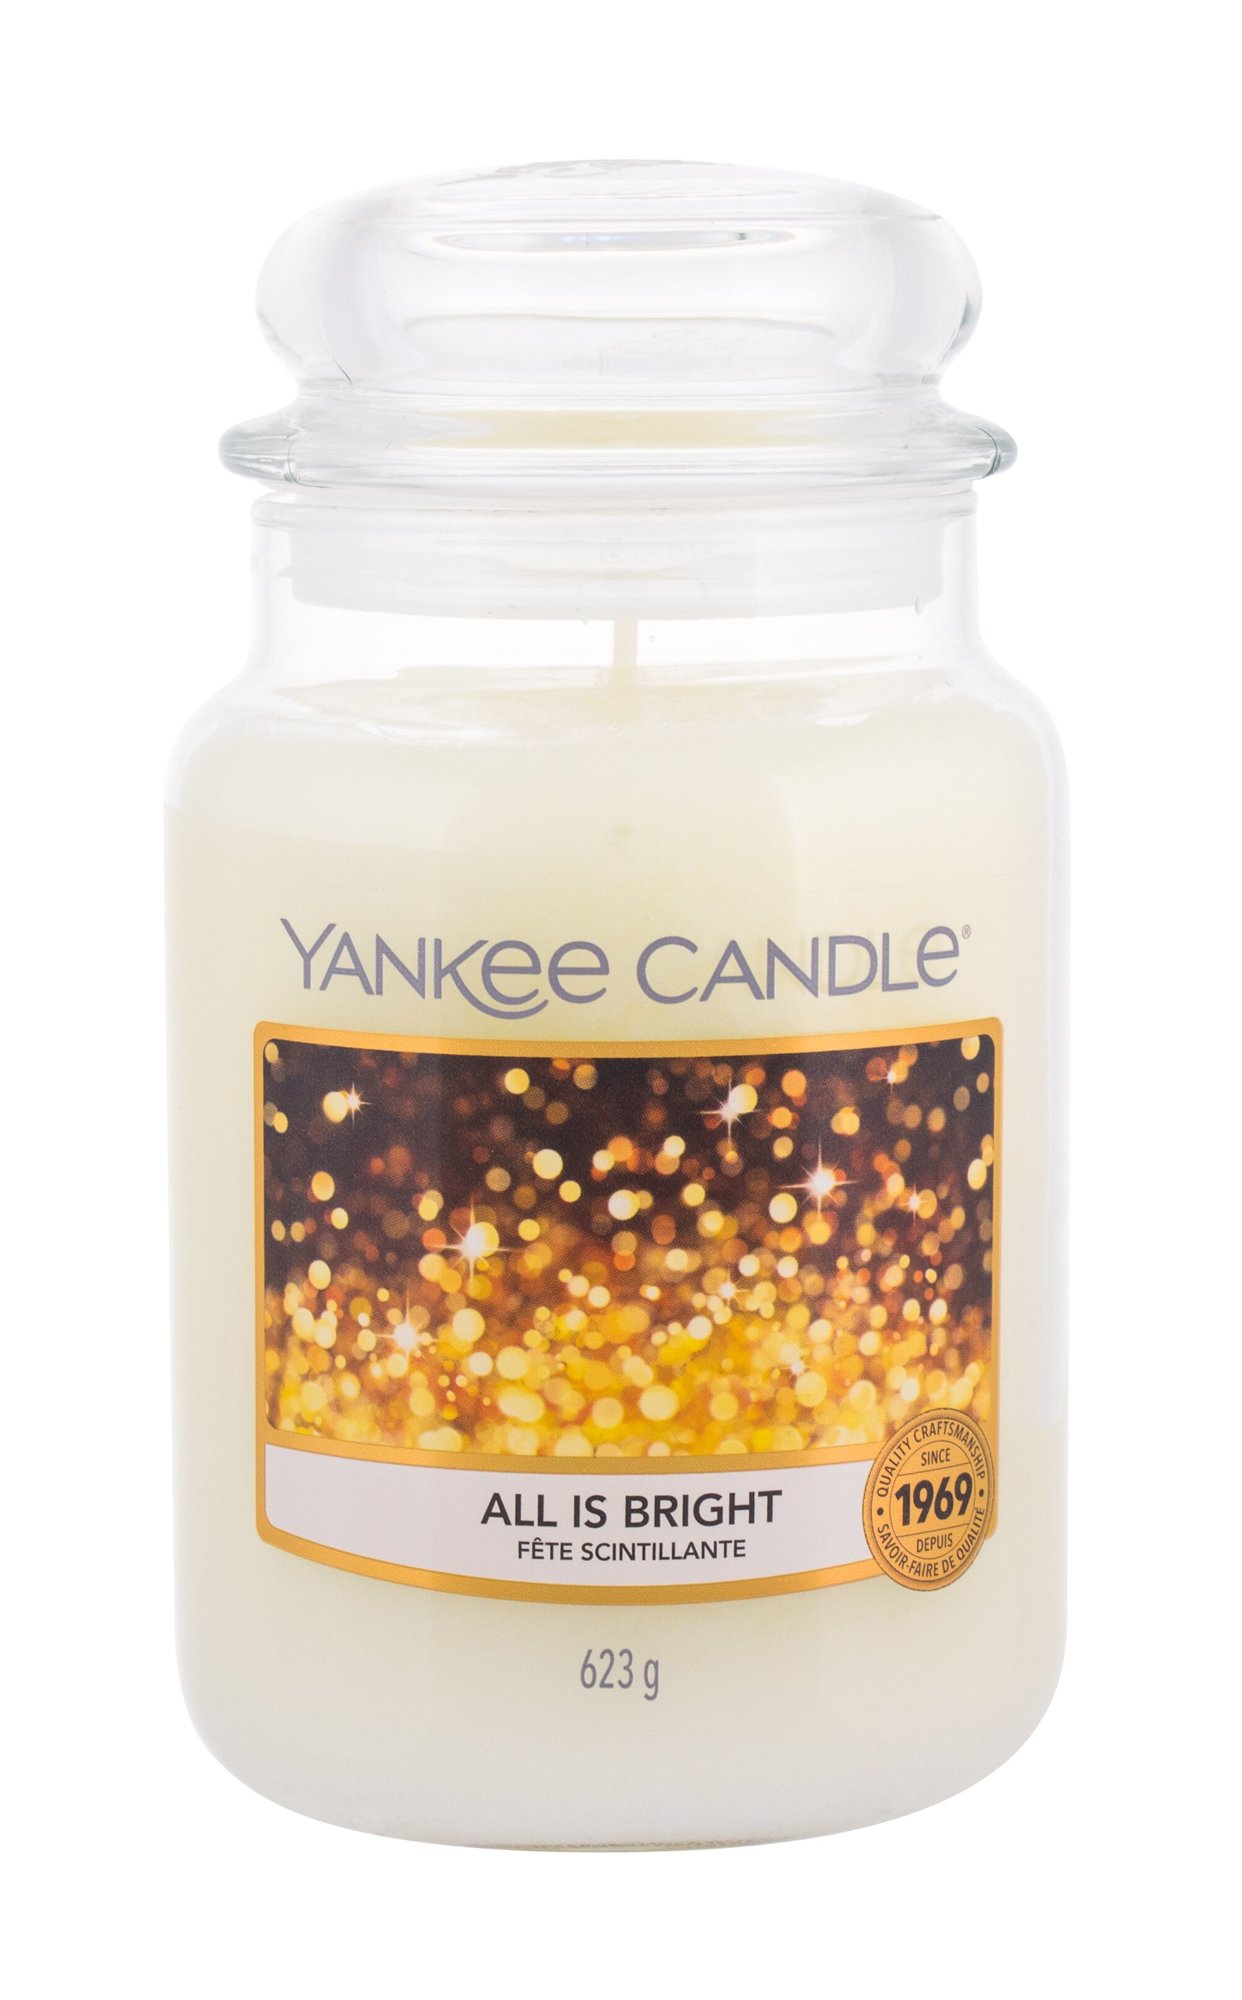 Yankee Candle All Is Bright 623g Kvepalai Unisex Scented Candle